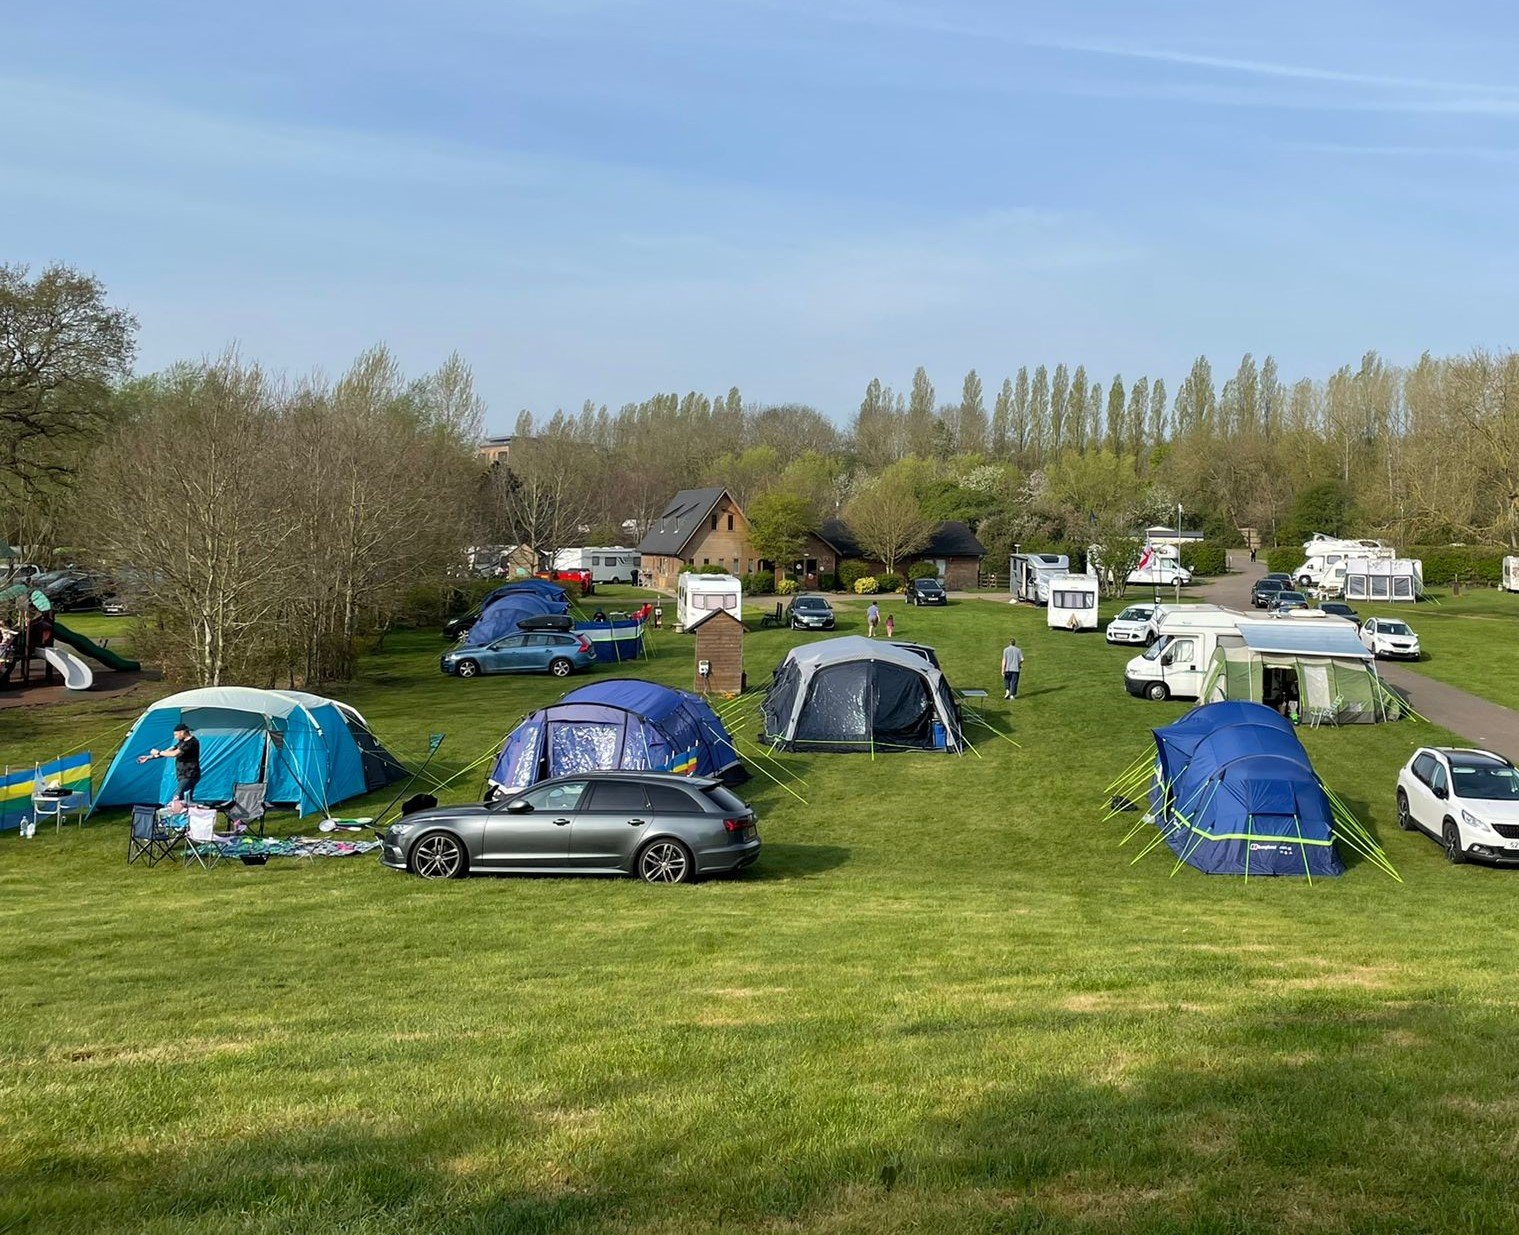 Camping on the rise at Gulliver’s Land